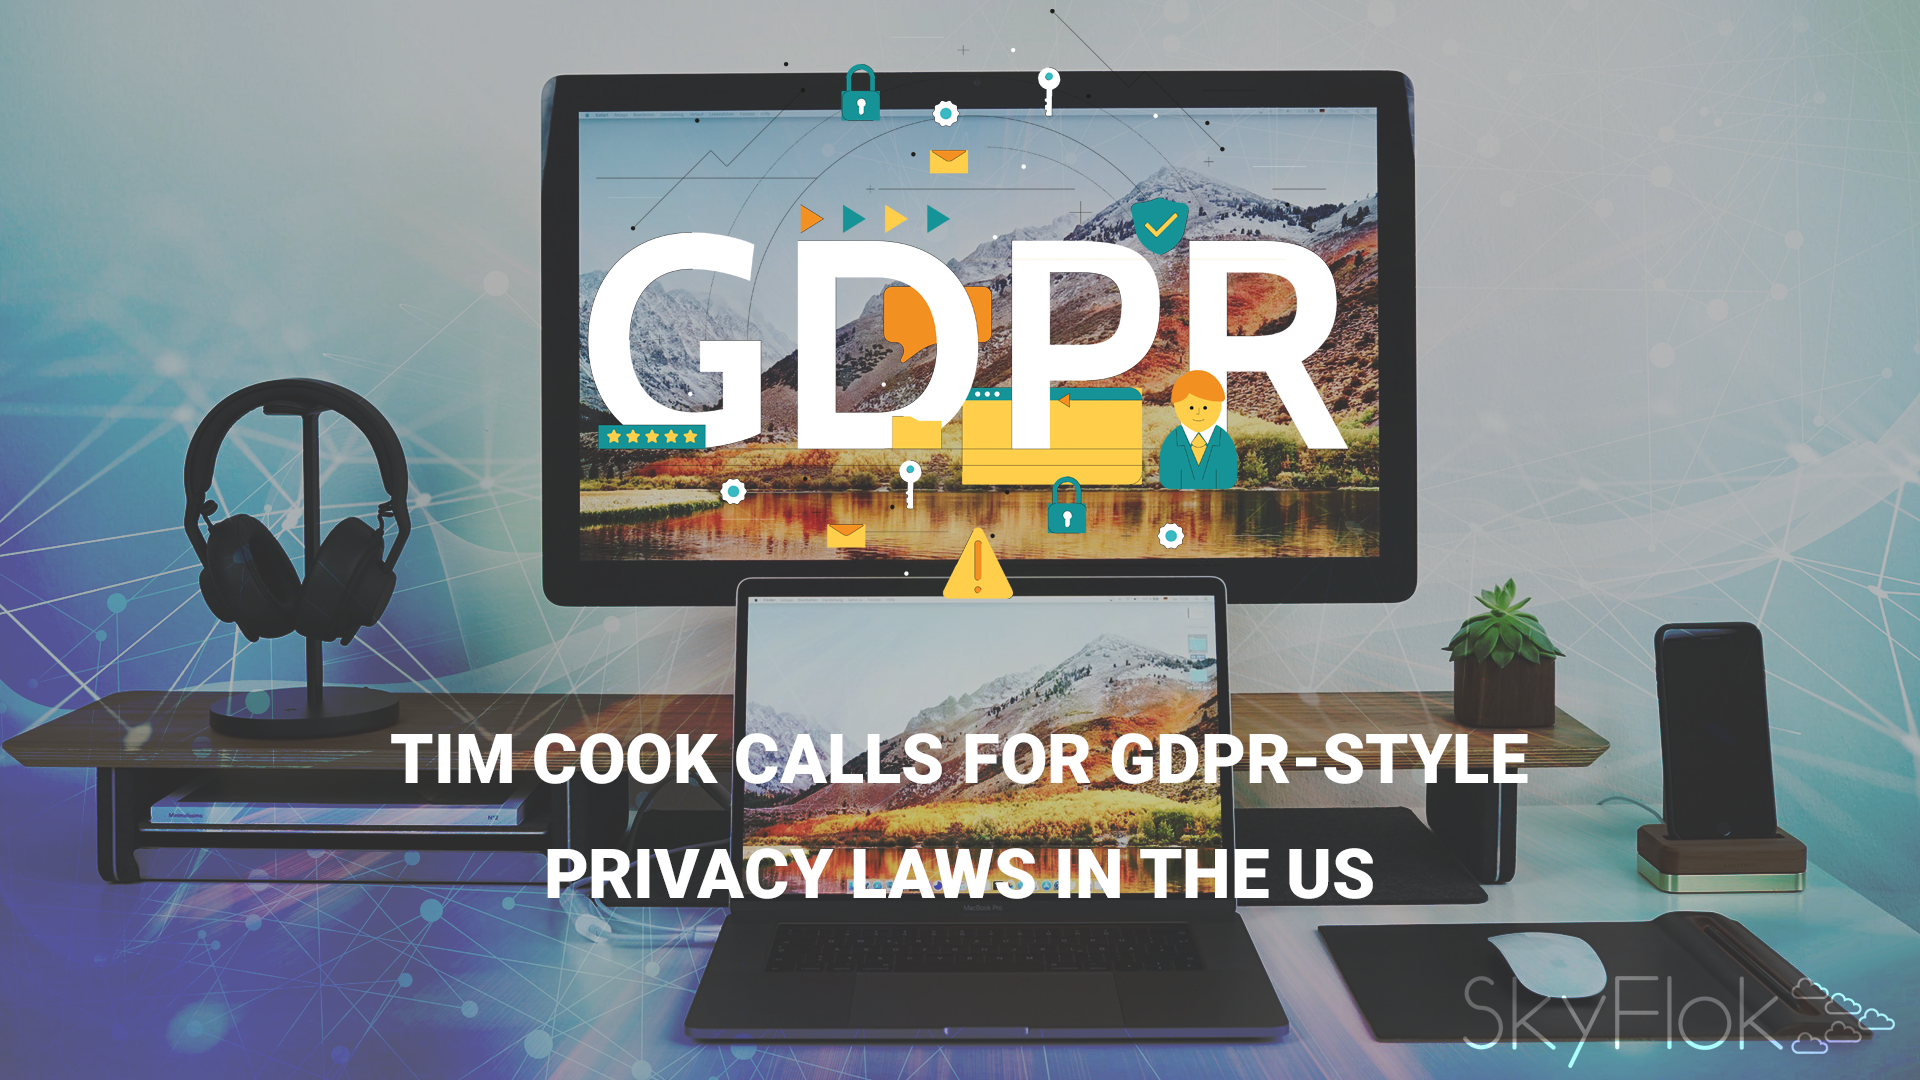 Tim Cook calls for GDPR-style privacy laws in the US